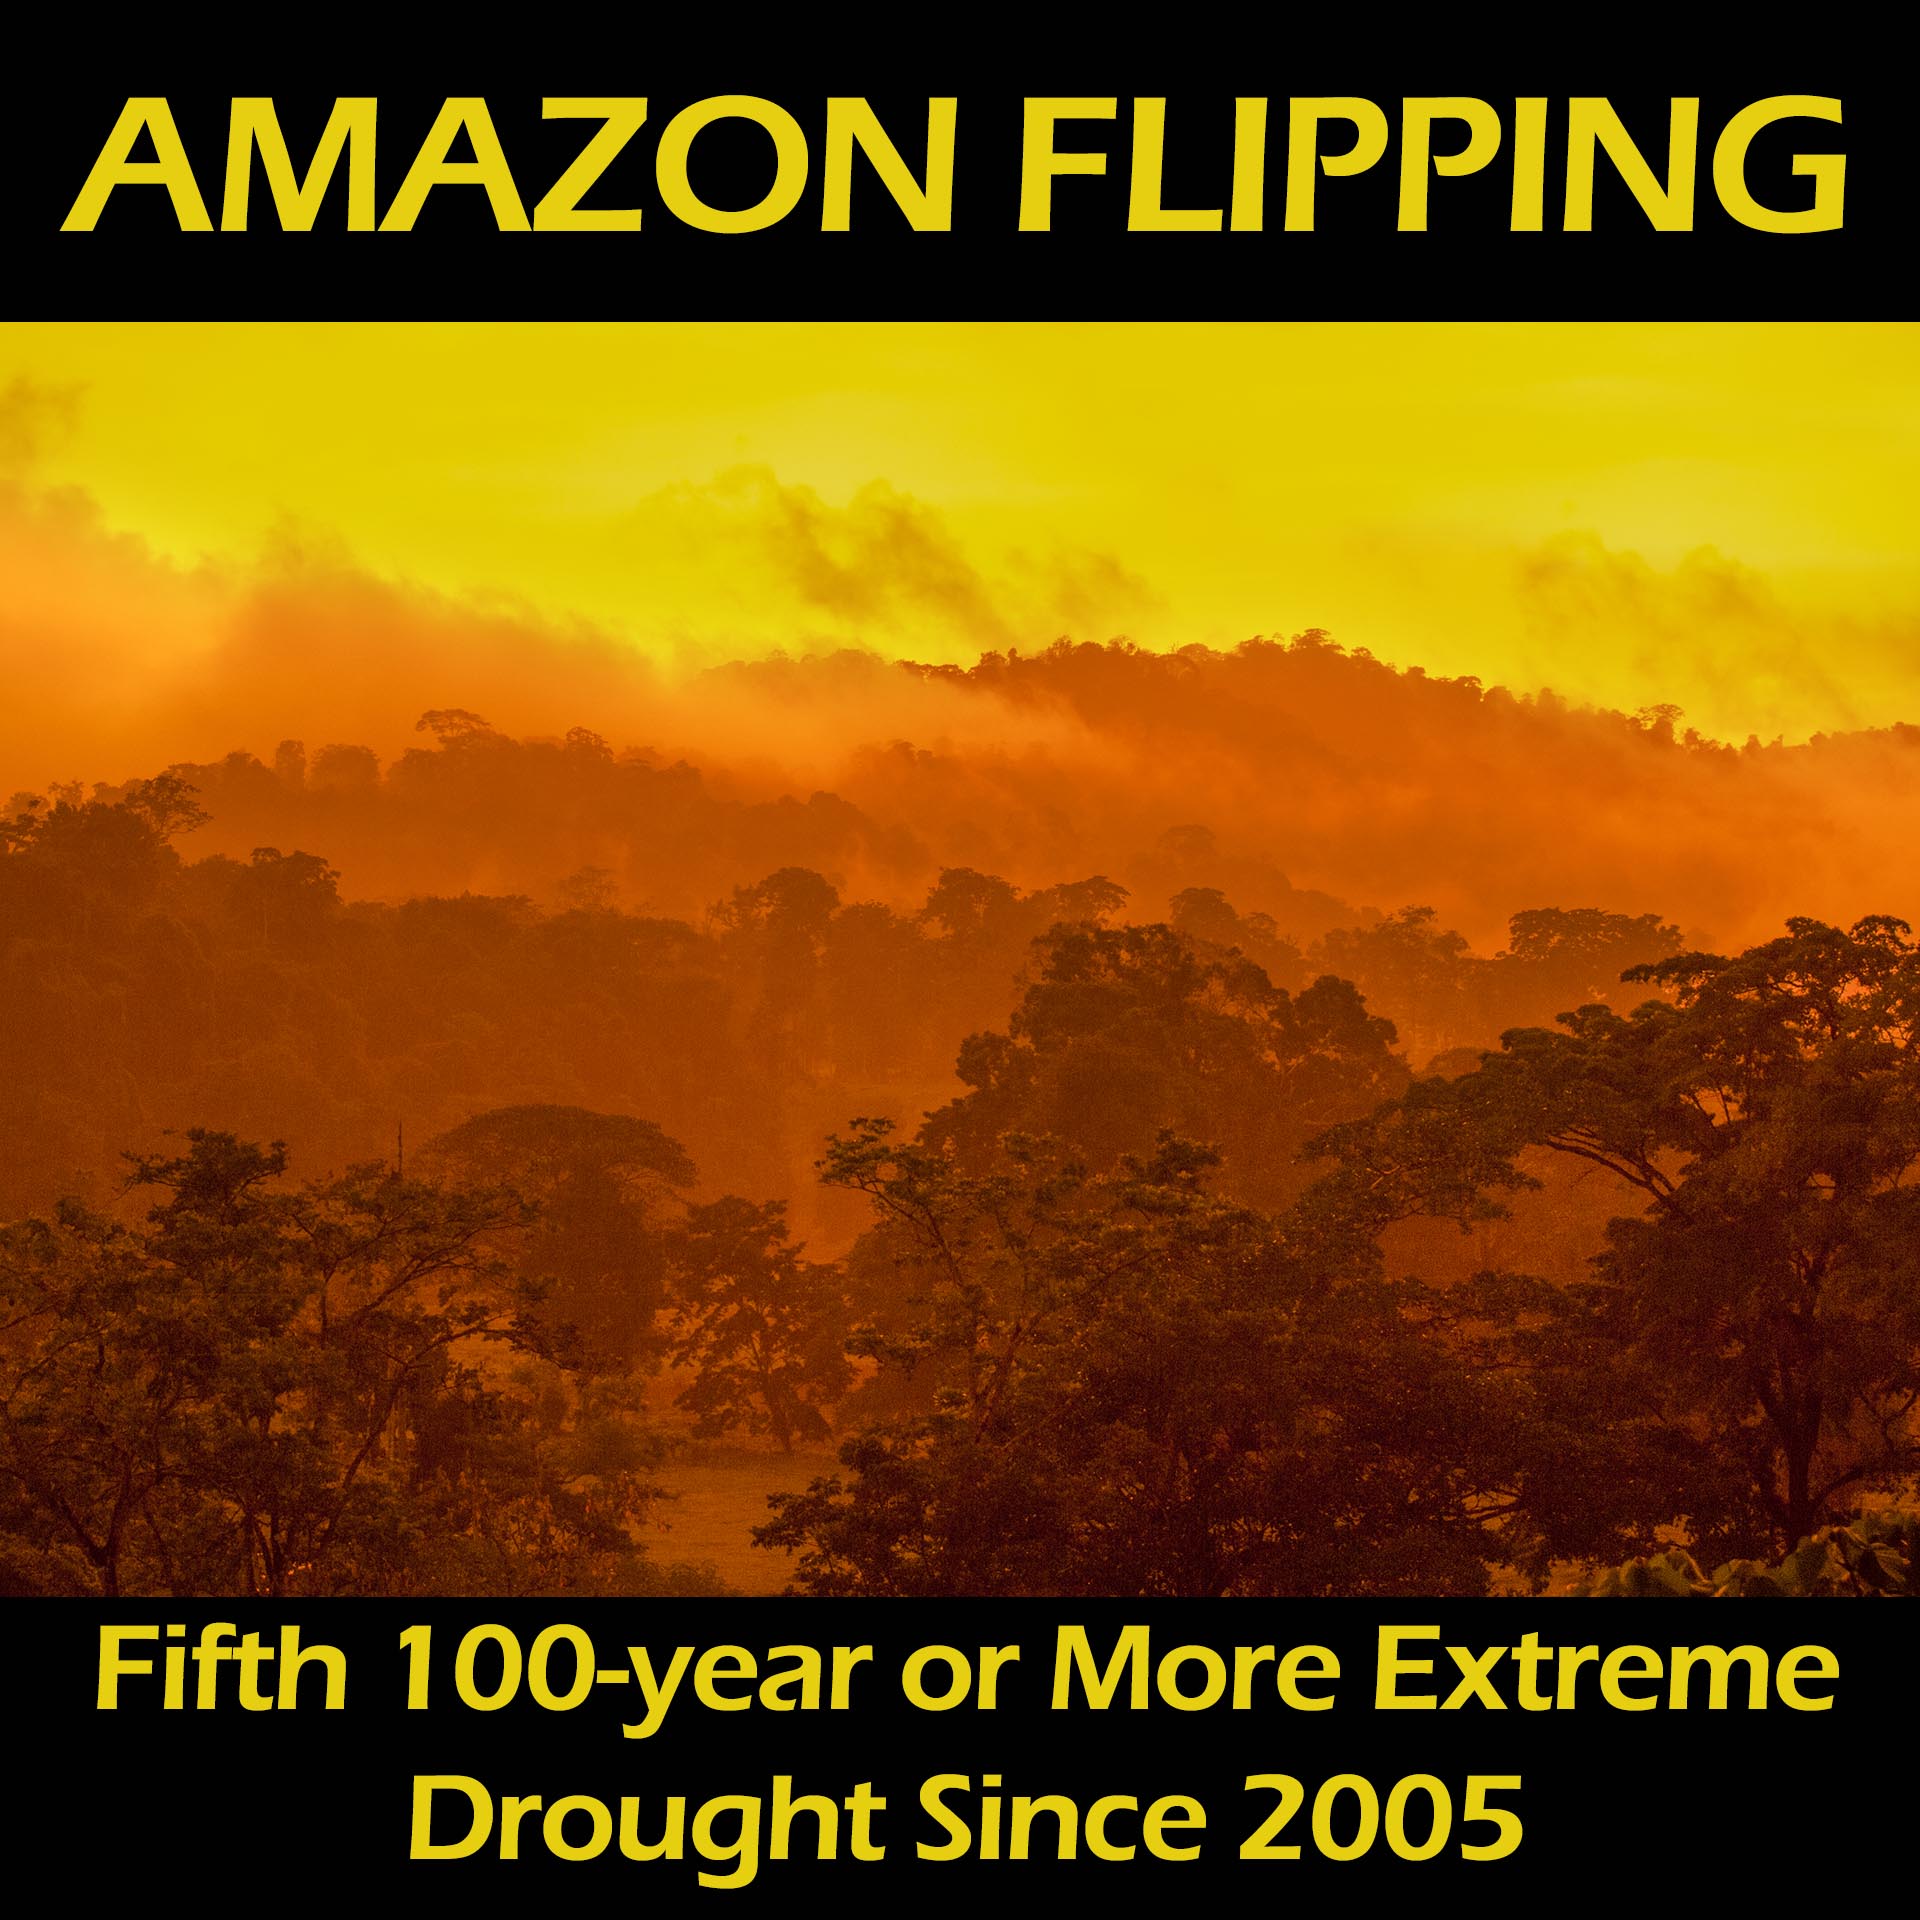 Worst Drought Ever in the Amazon, Caused By Climate Change